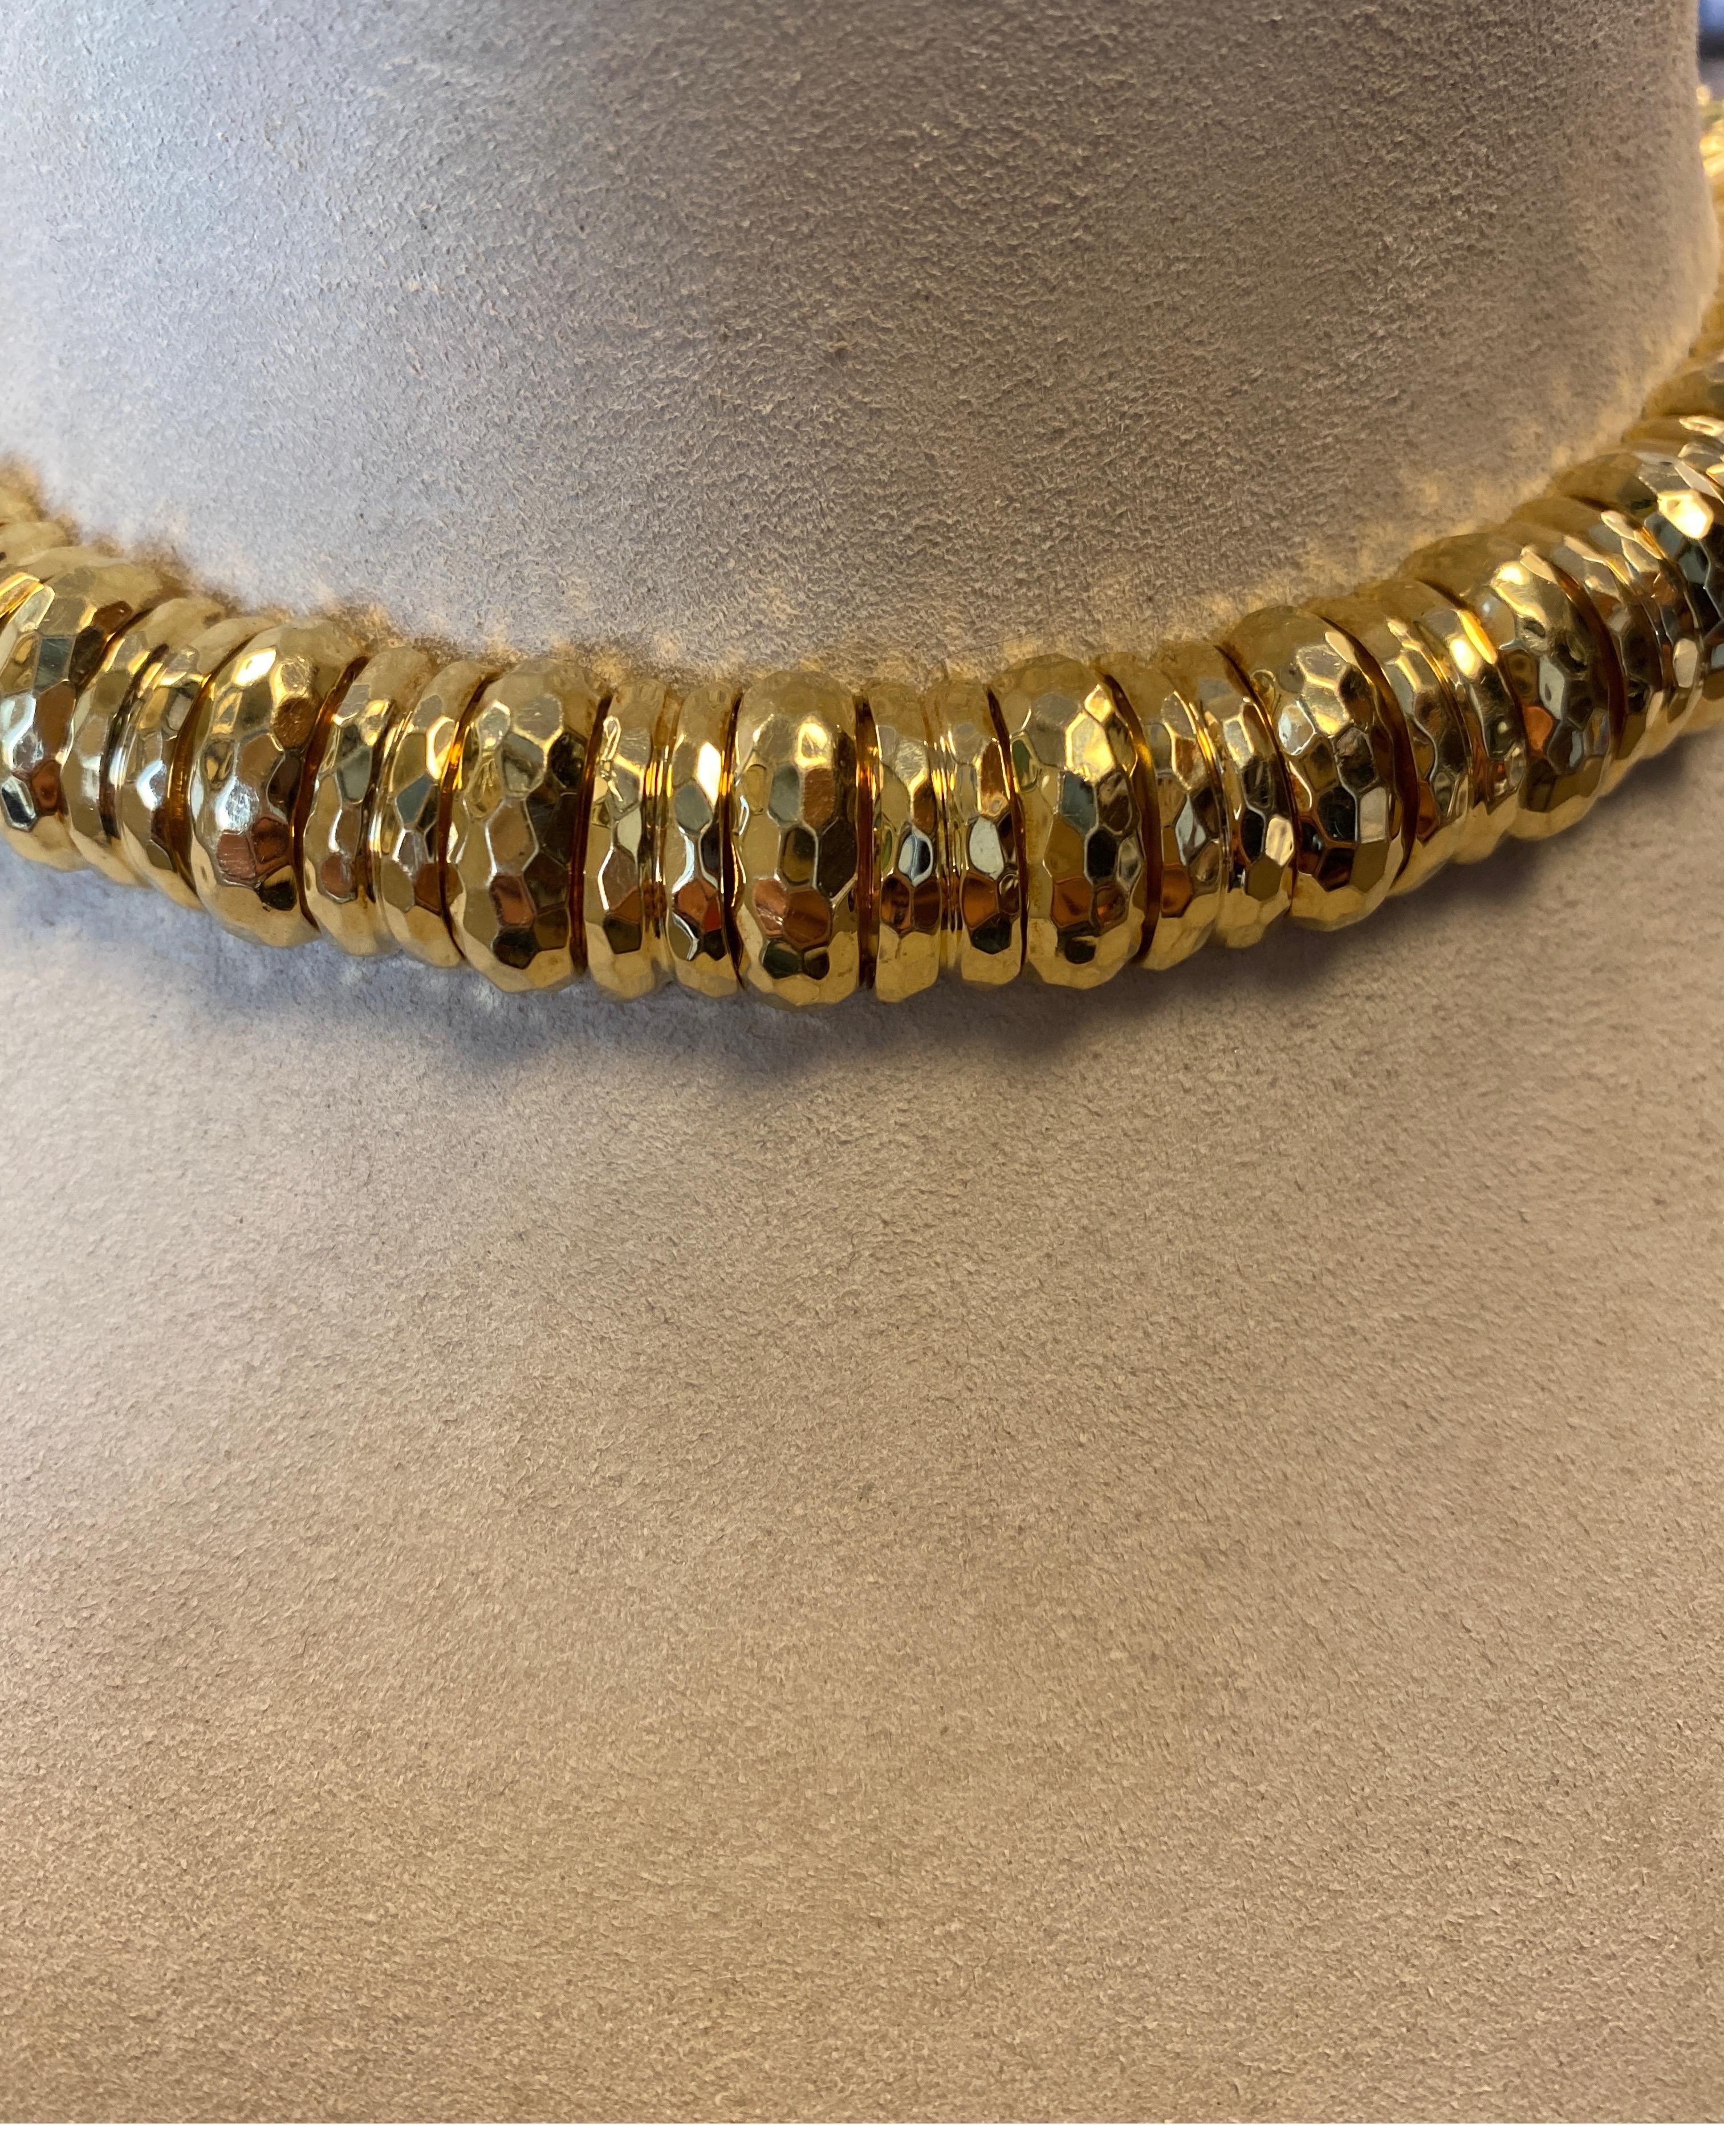 Henry Dunay 18K yellow gold faceted necklace.
Last known retail $35,500
Brand new, never worn